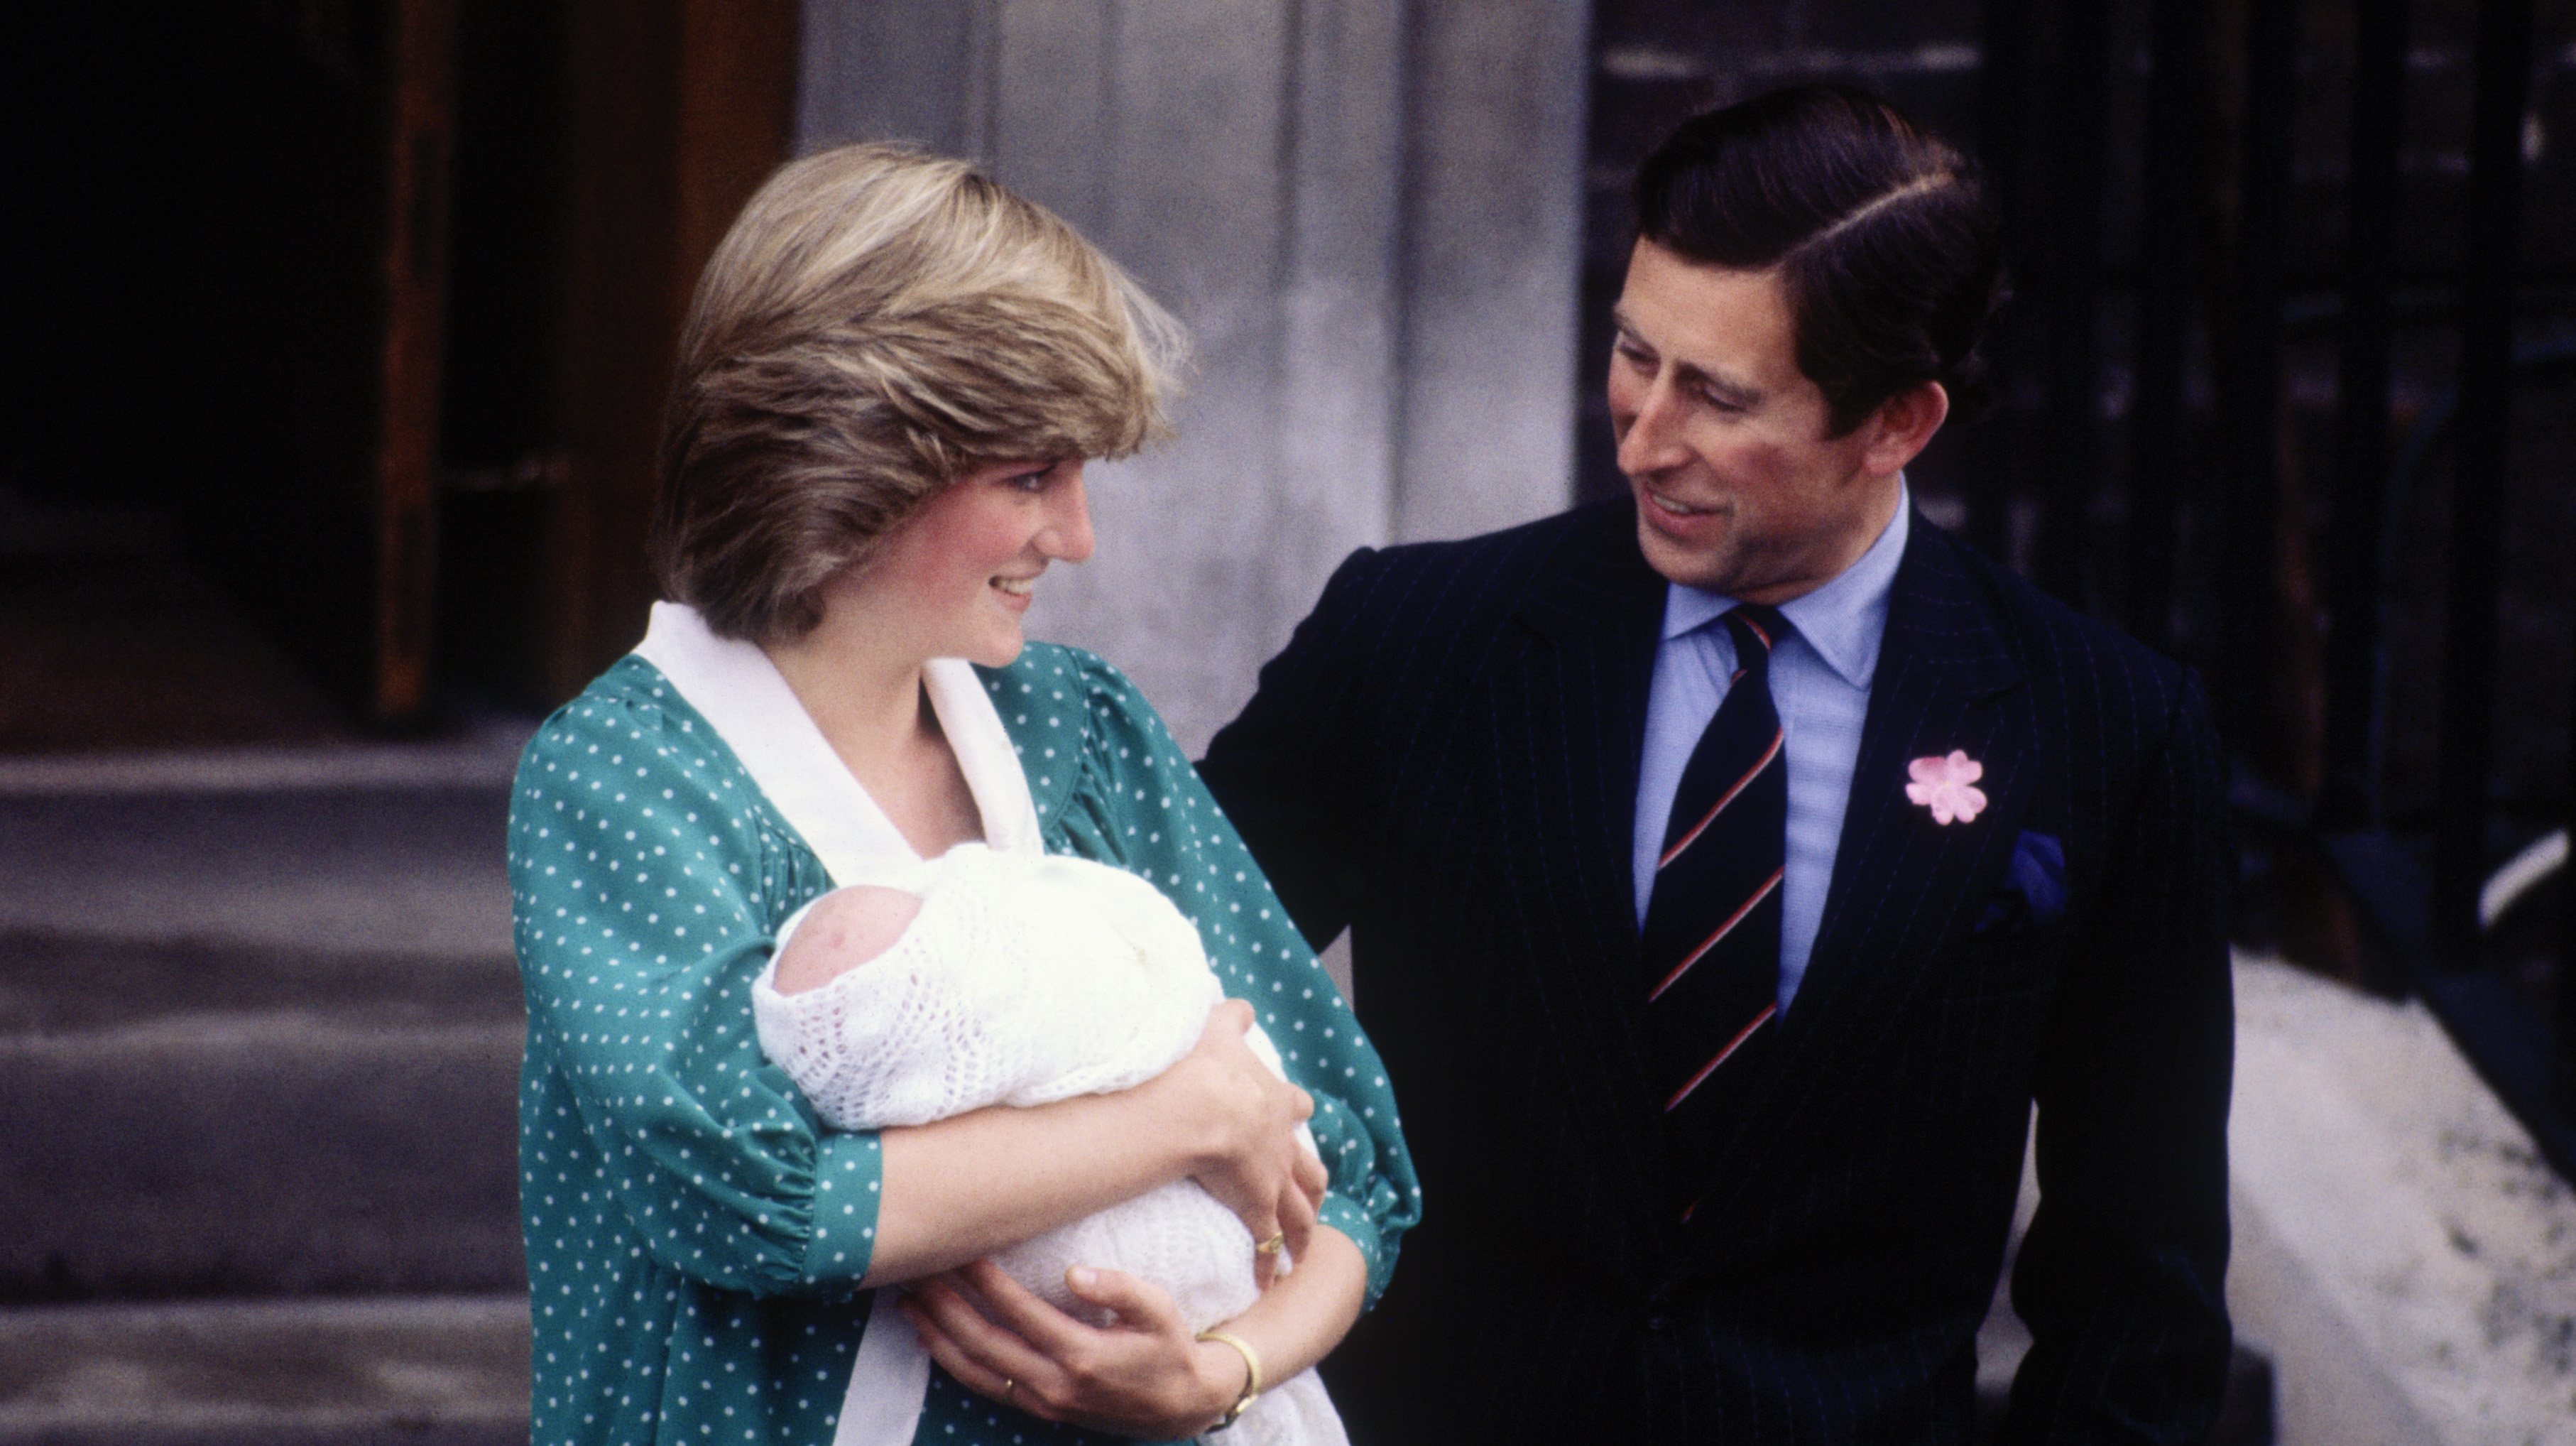 New born Prince William with Diana Princess of Wales and Prince Charles